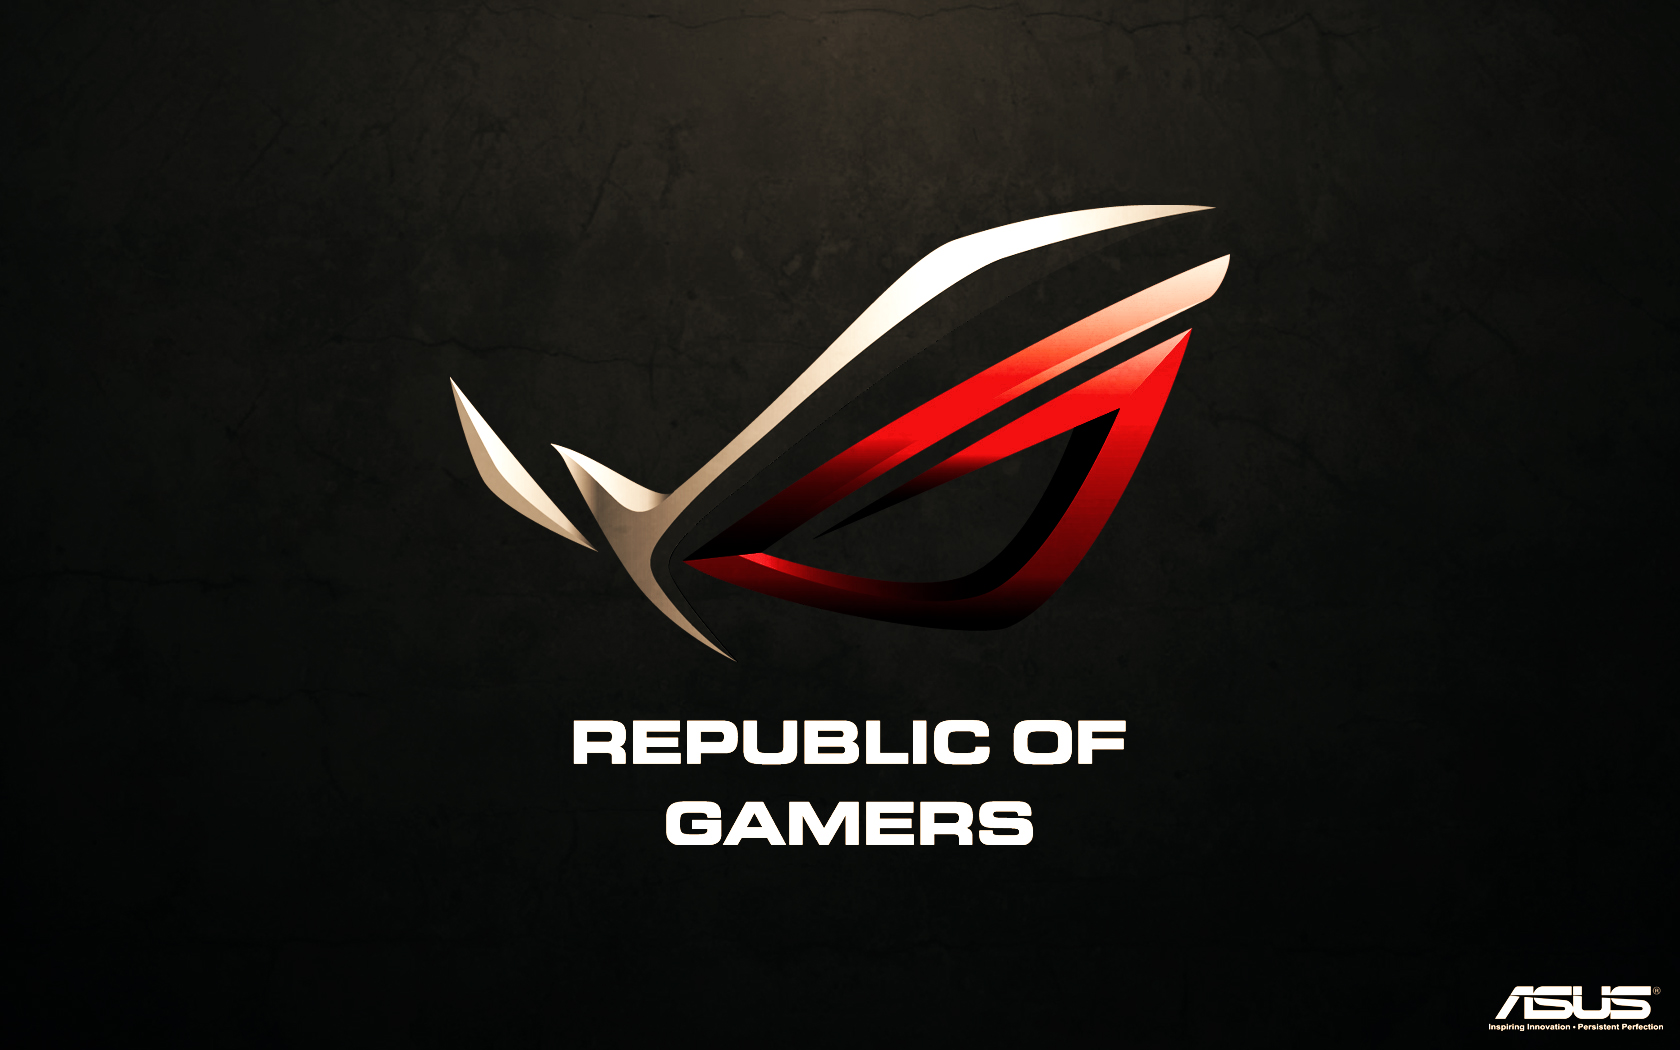 ASUS Republic of Gamers Showcases Latest Gaming Lineup at 